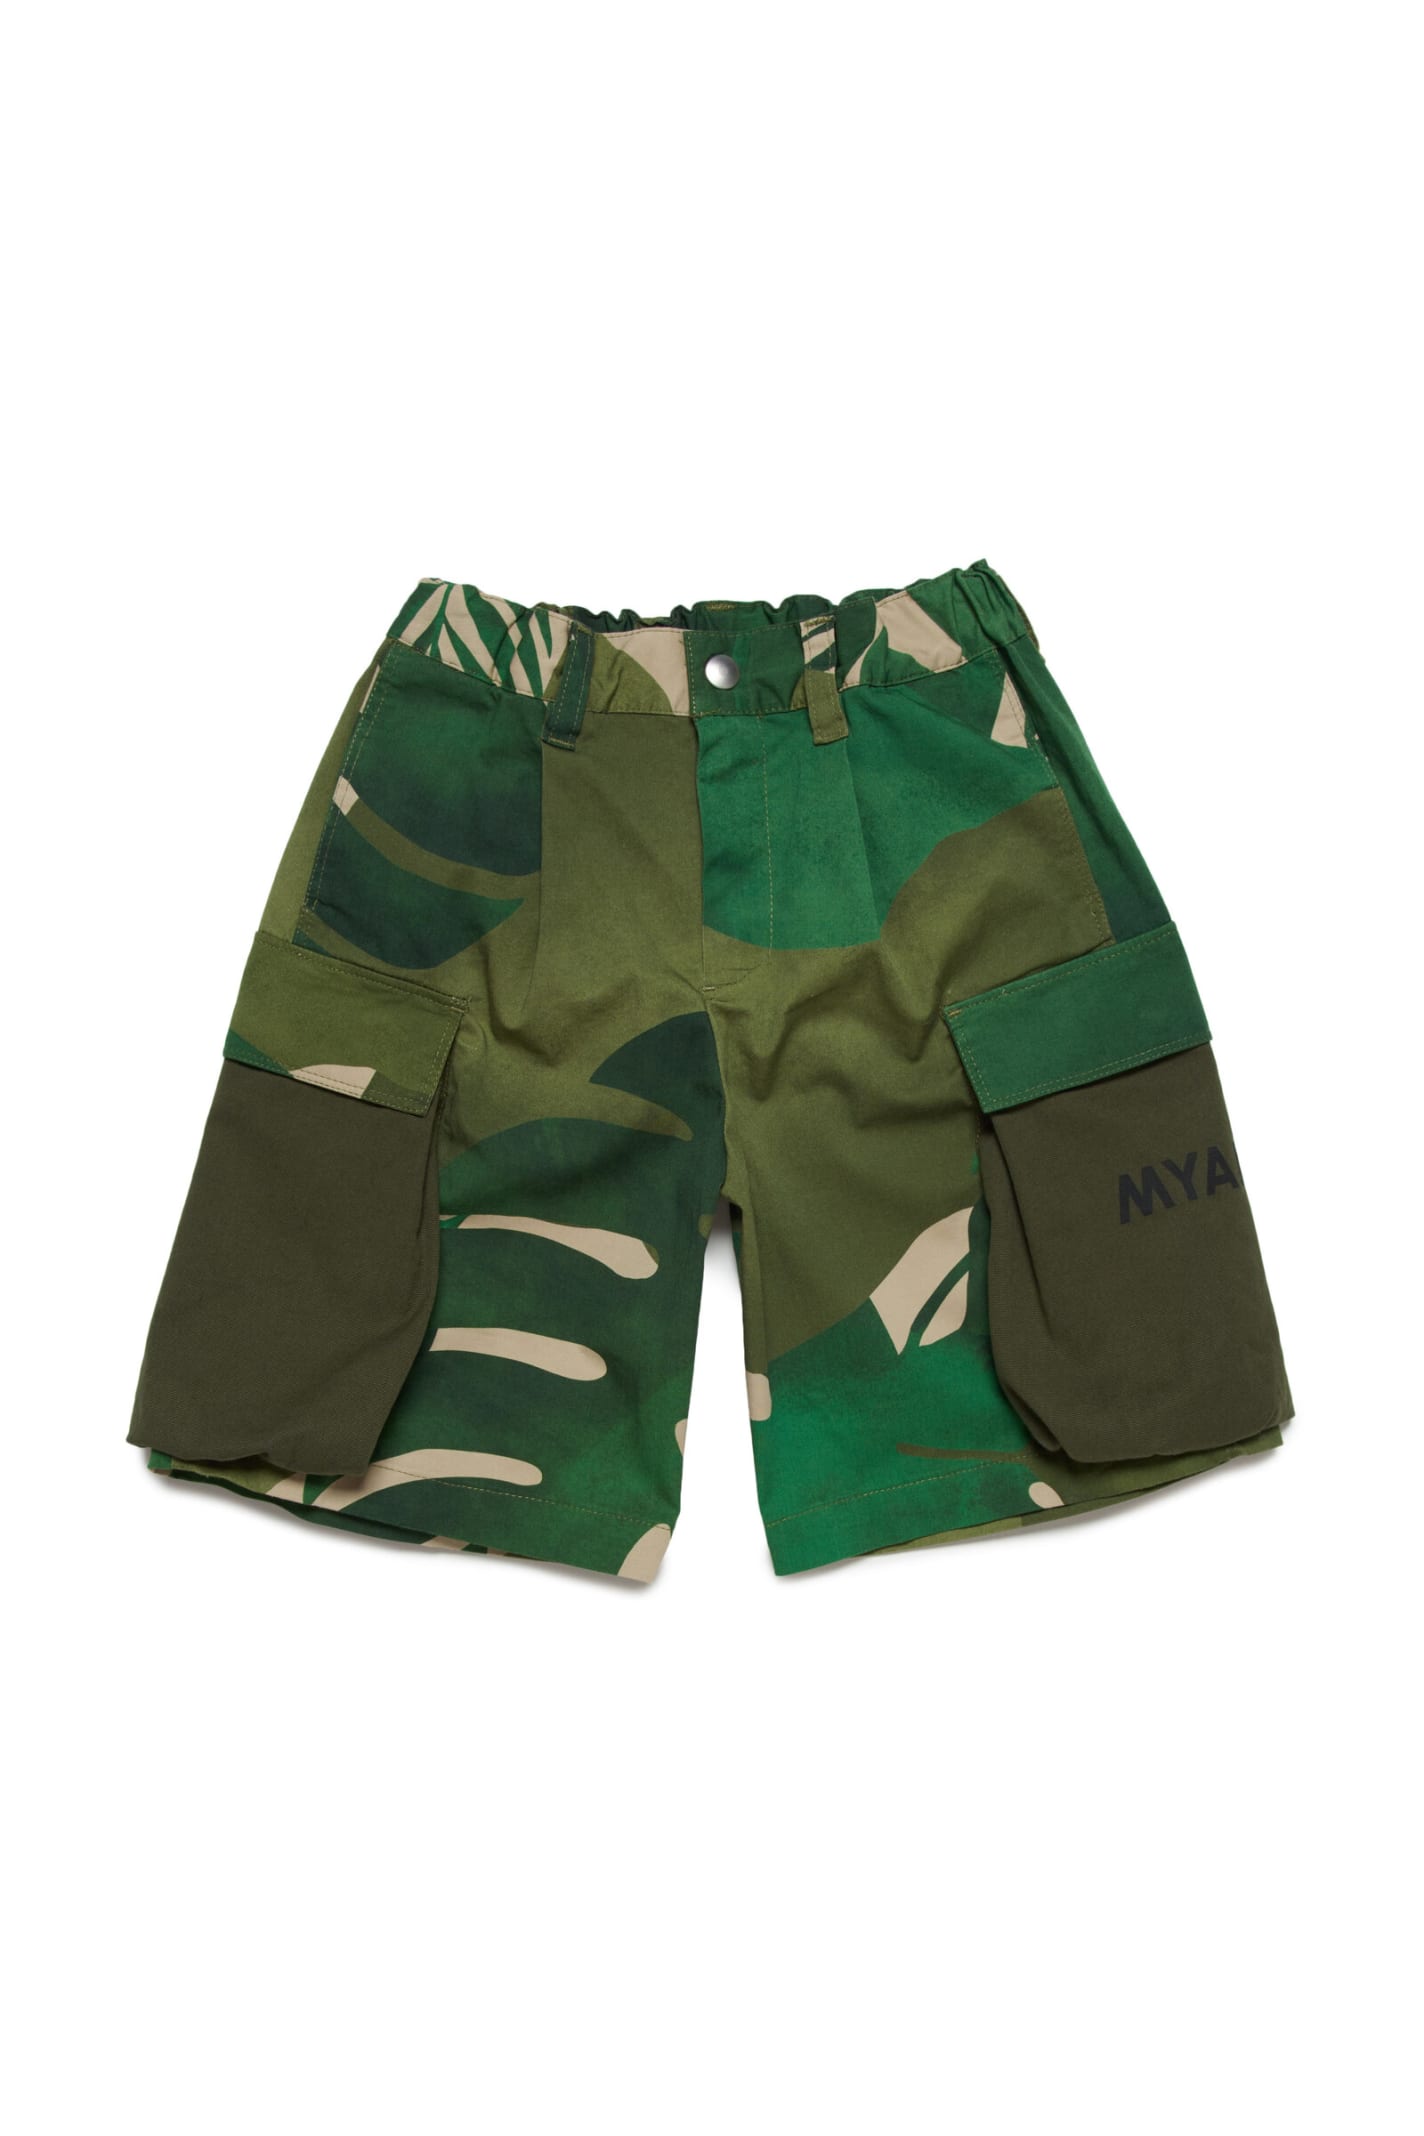 MYAR Myp14u Shorts Myar Deadstock Shorts With Rainforest Patterned Fabric Applications